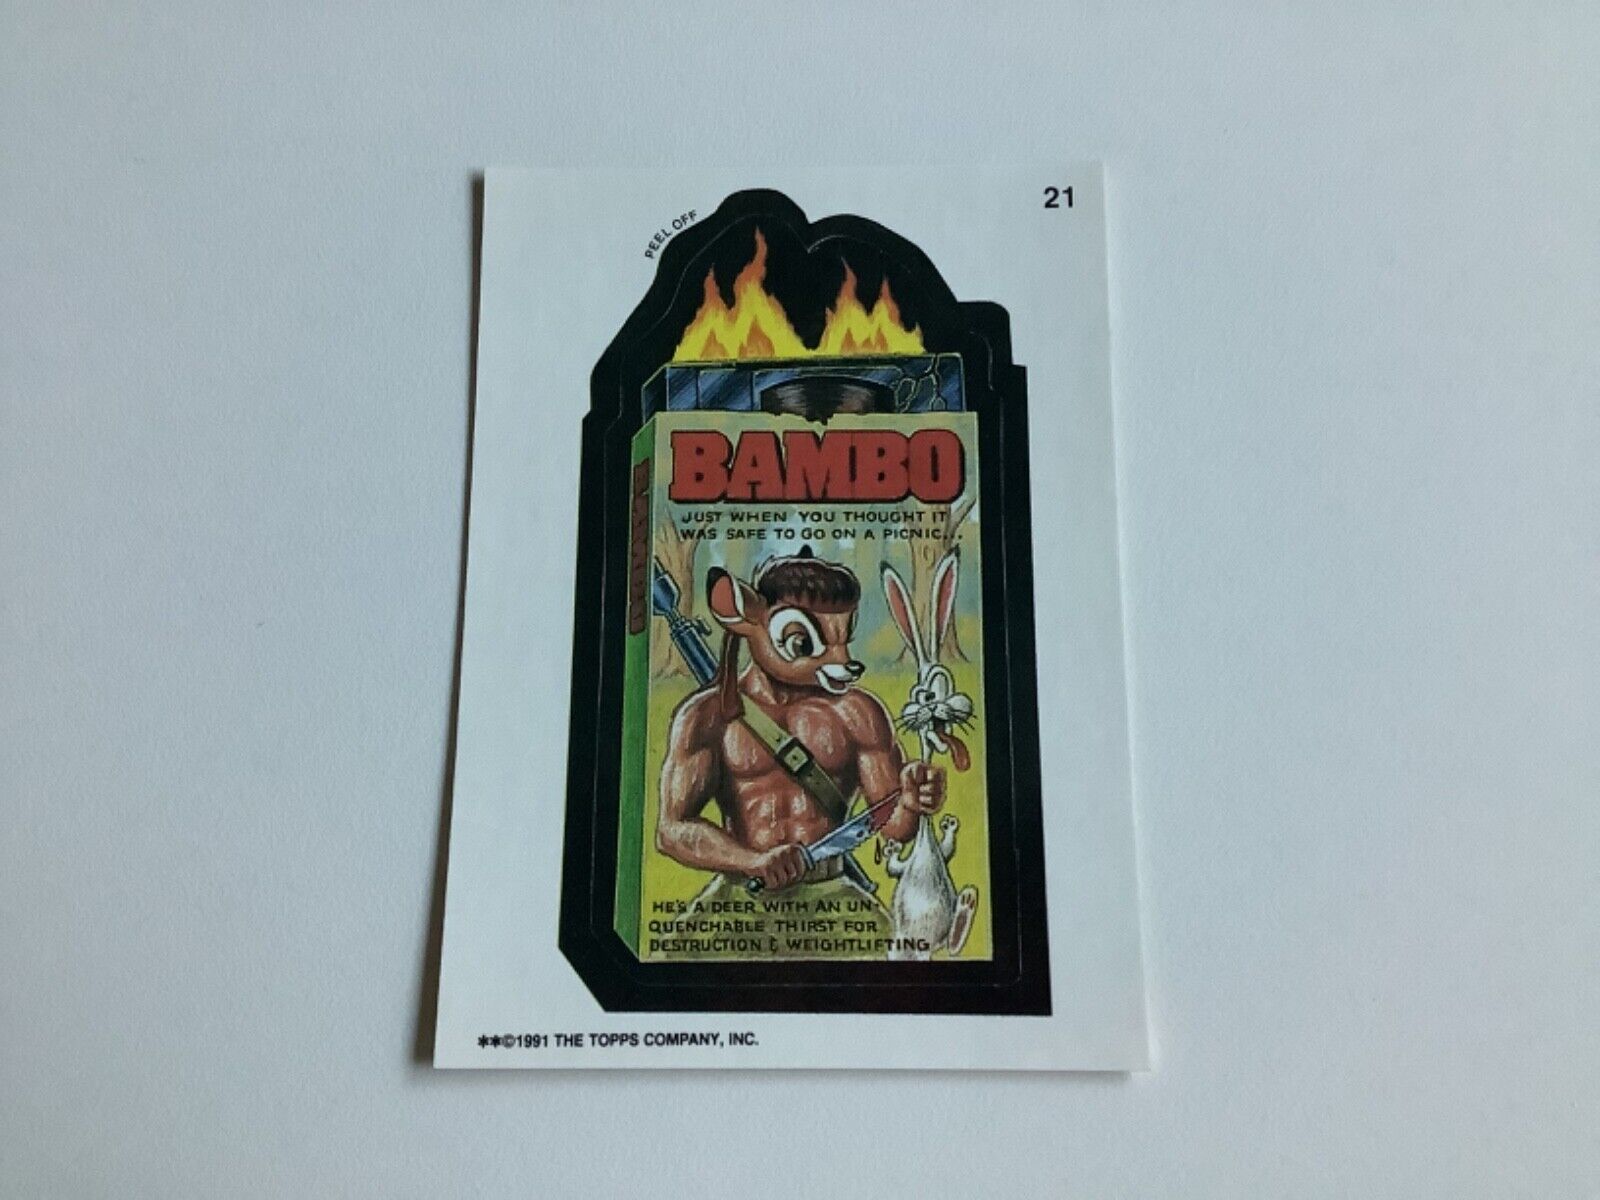 RAMBO & BAMBI 1991 TOPPS WACKY PACKAGES CARD PARODY, BAMBO #21 NM VINTAGE 